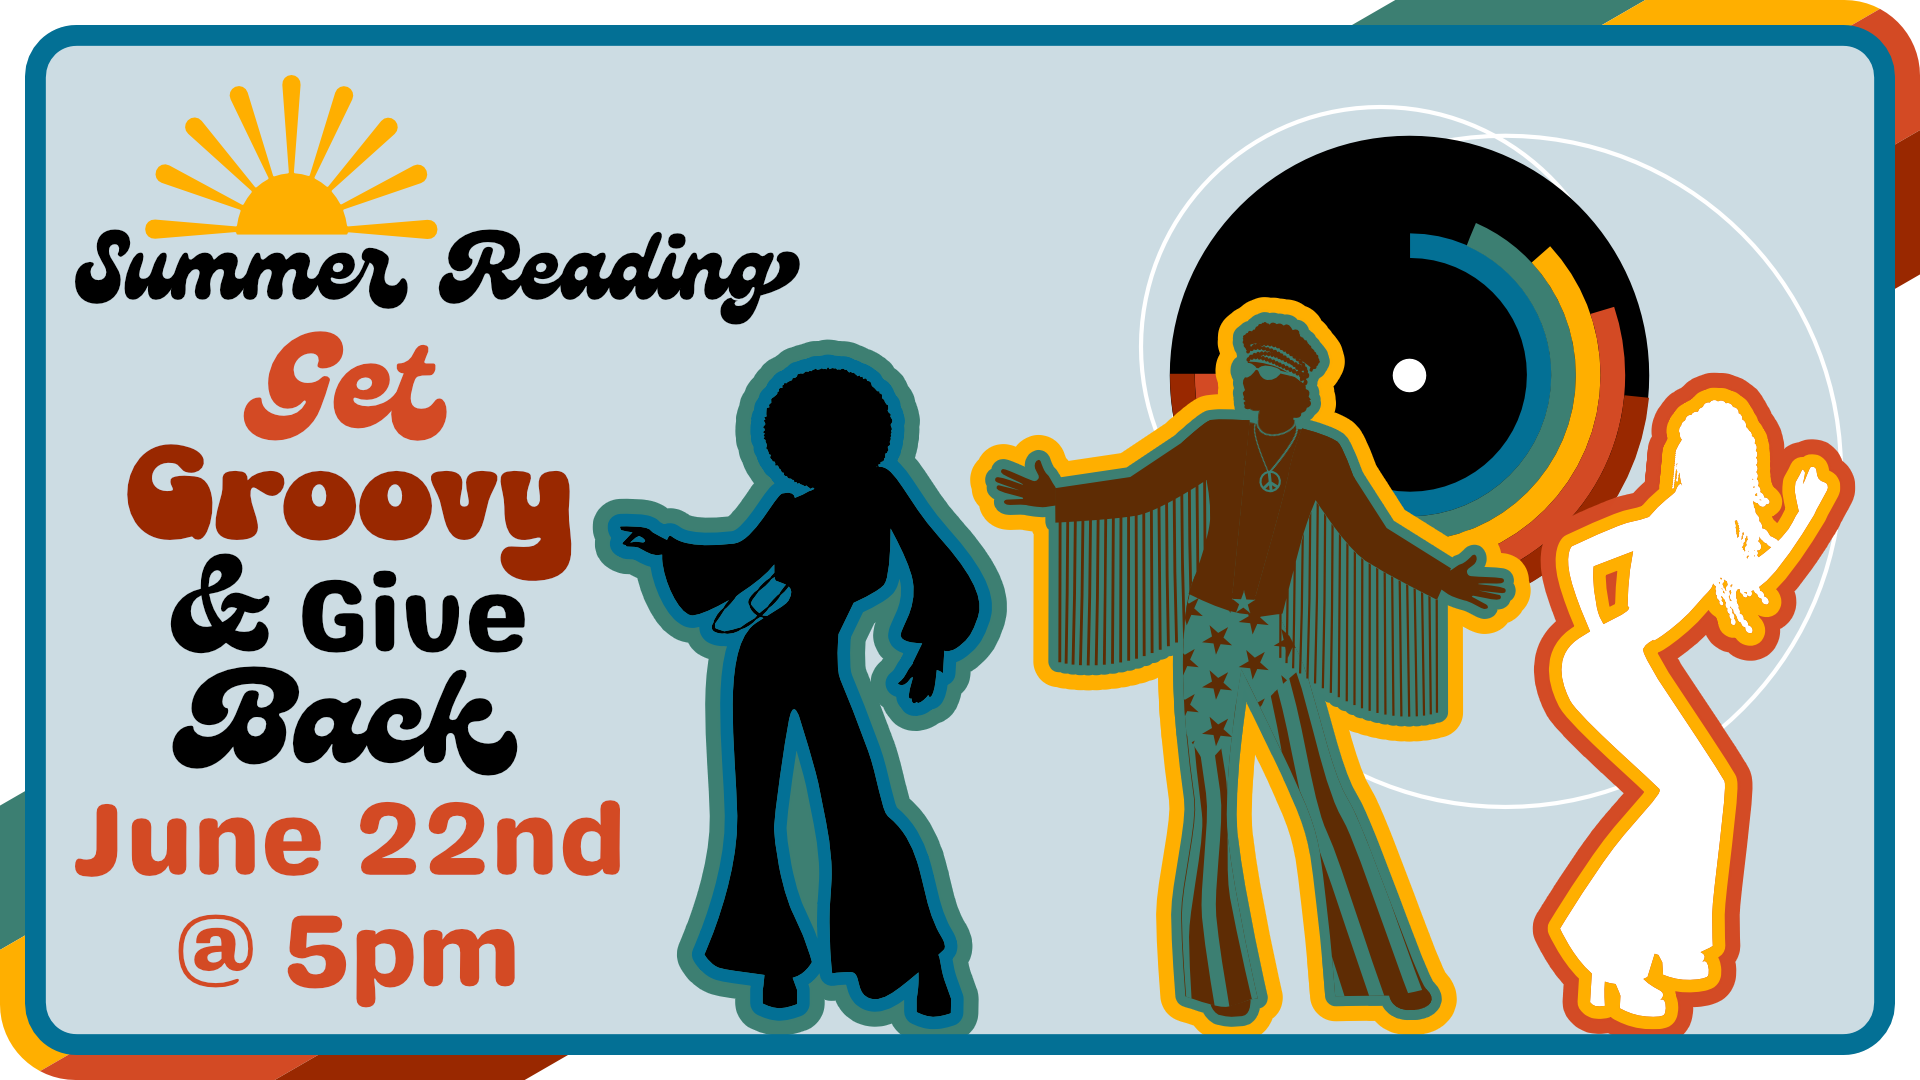 Summer Reading, Get Groovy and Give Back, June 22nd at 5pm